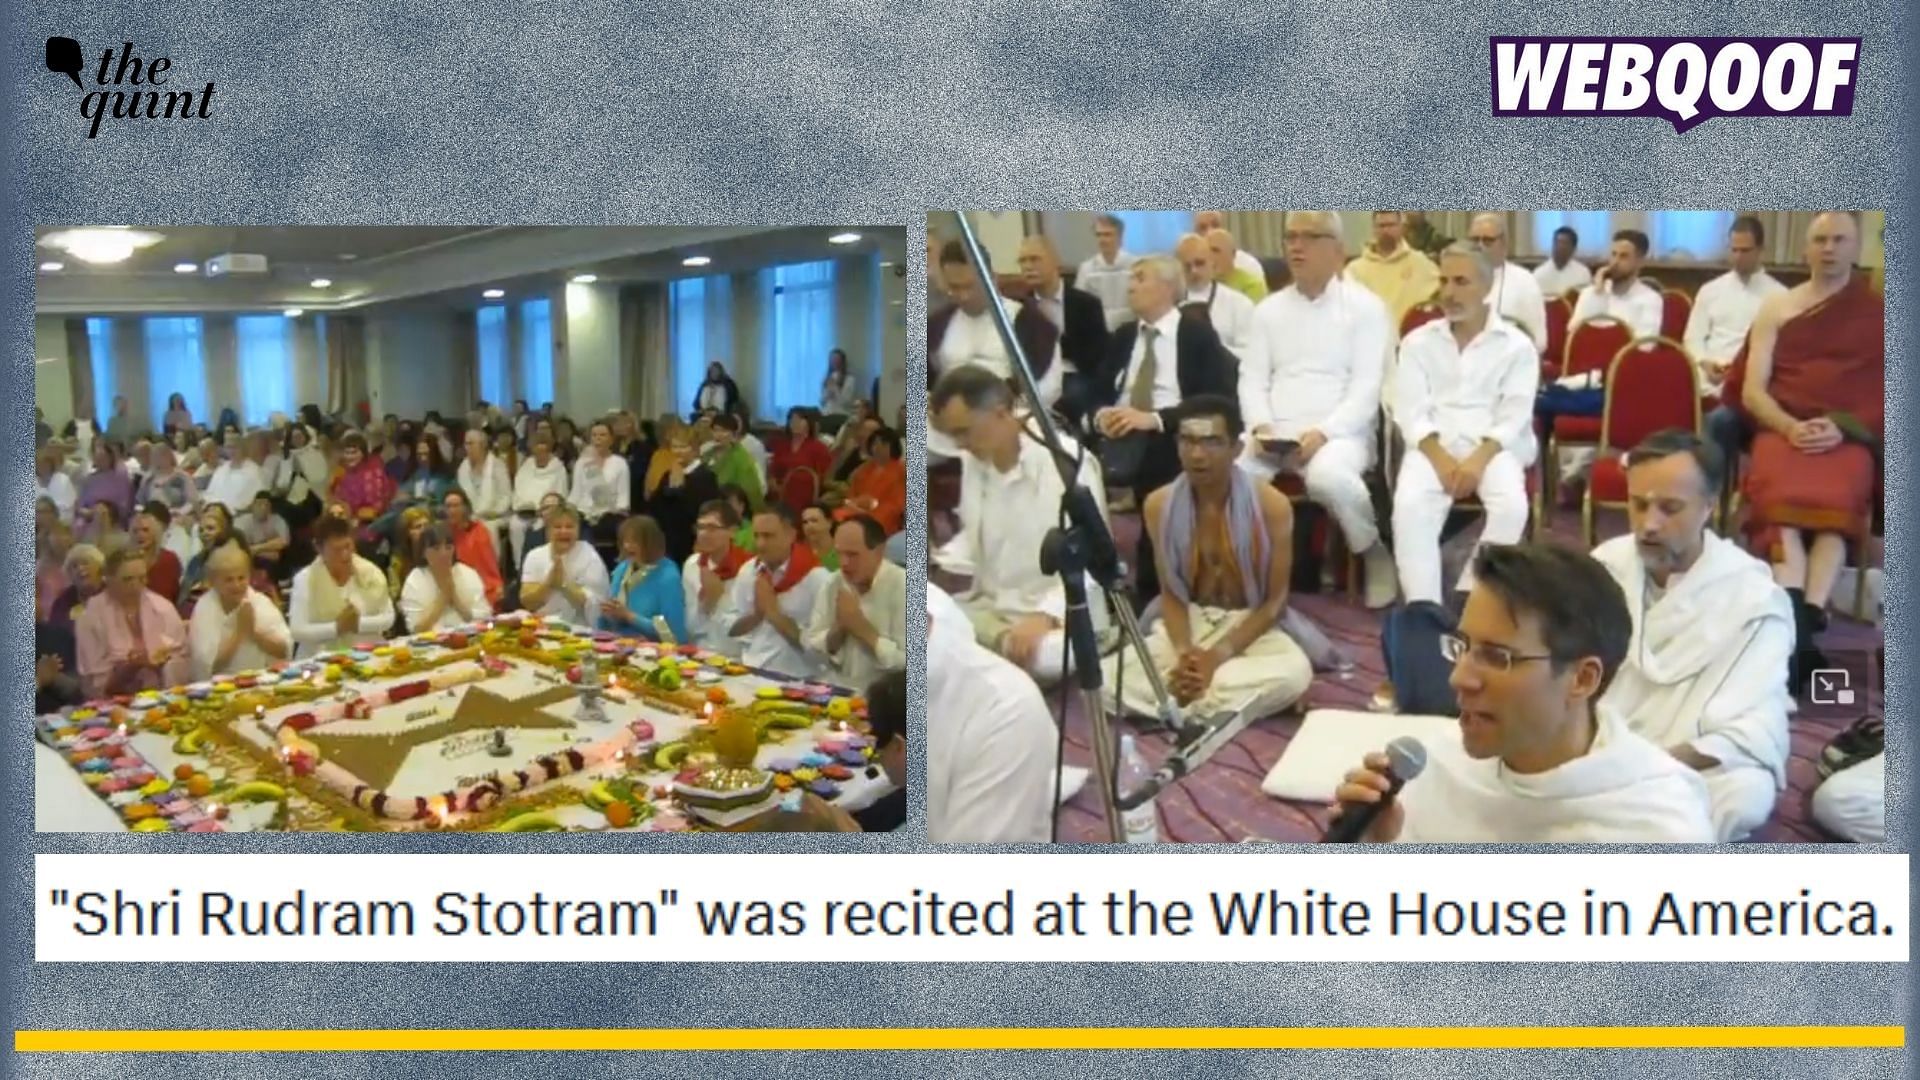 <div class="paragraphs"><p>Fact-check: This video showing a several people chanting Indian vedic mantras together is not from the White House but from Croatia, Europe.</p></div>